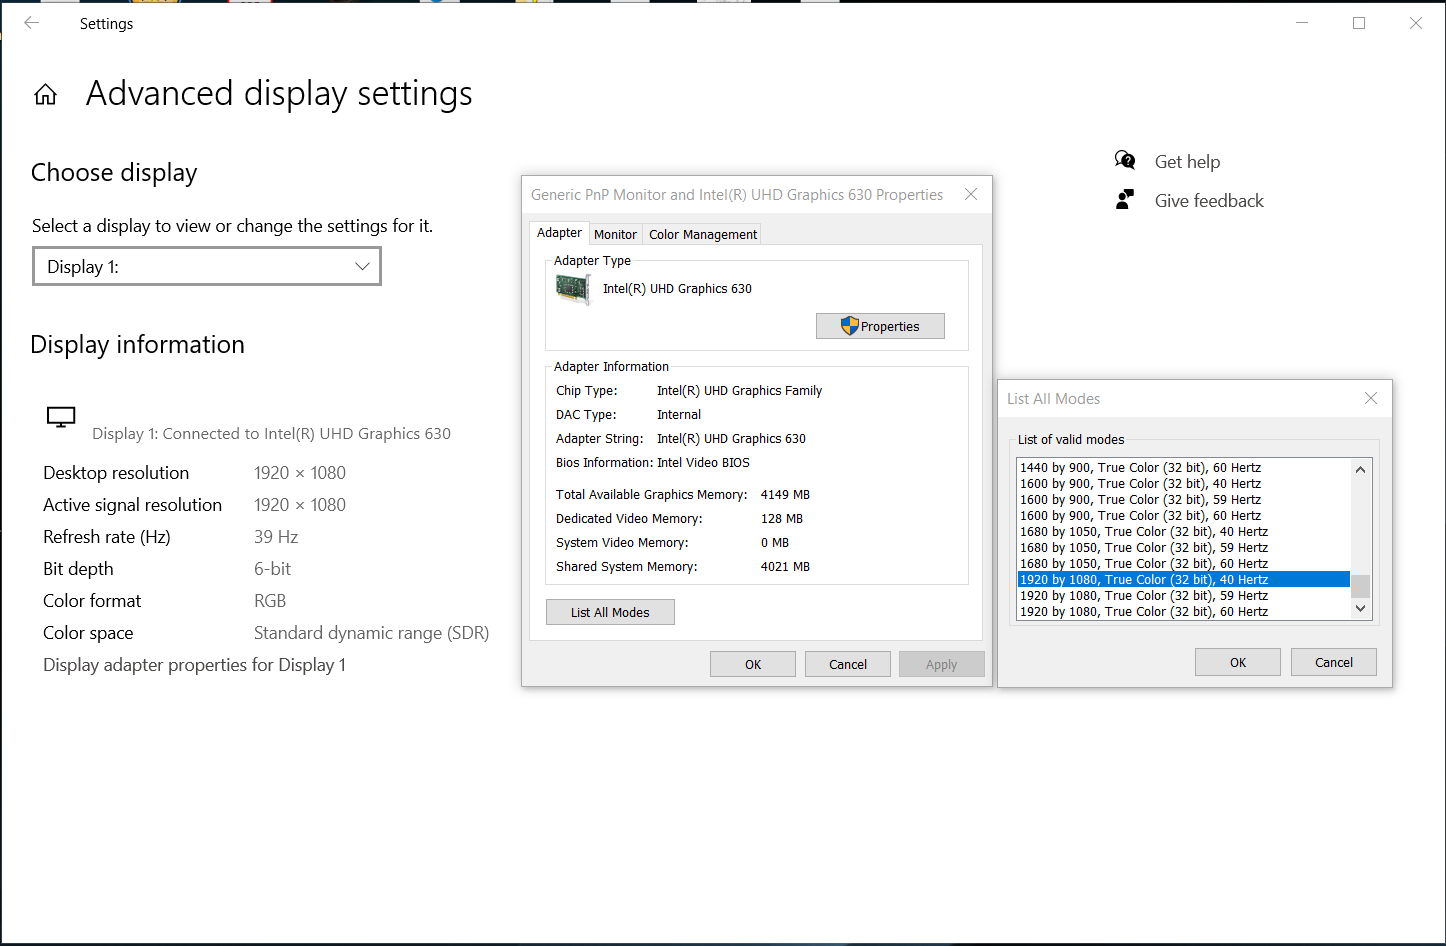 How Can I Stop Display Settings from Changing When Unplugging Laptop? 8531d8fe-0e58-47d5-bfdf-d685d73eee8b?upload=true.png